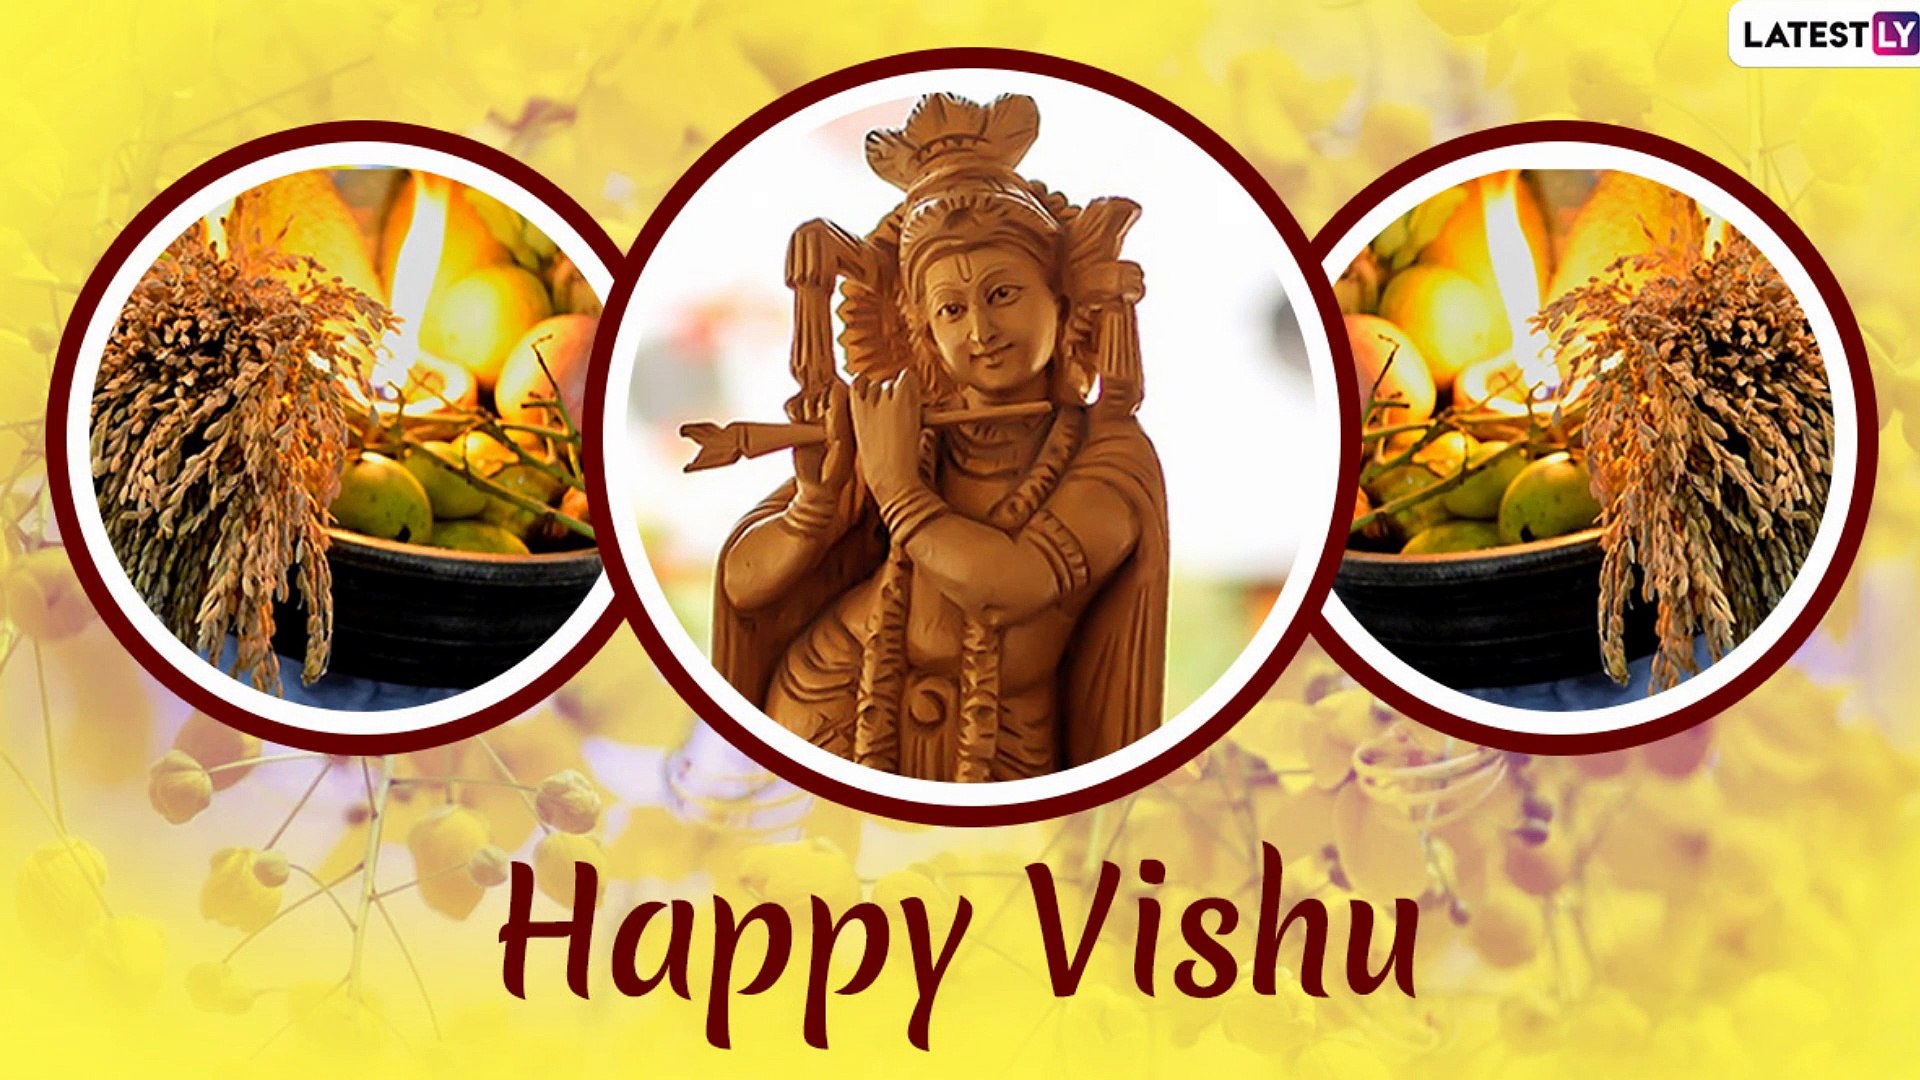 Happy Vishu 2020 Messages: WhatsApp Greetings, Images, Quotes To Send Happy  Kerala New Year Wishes - video Dailymotion